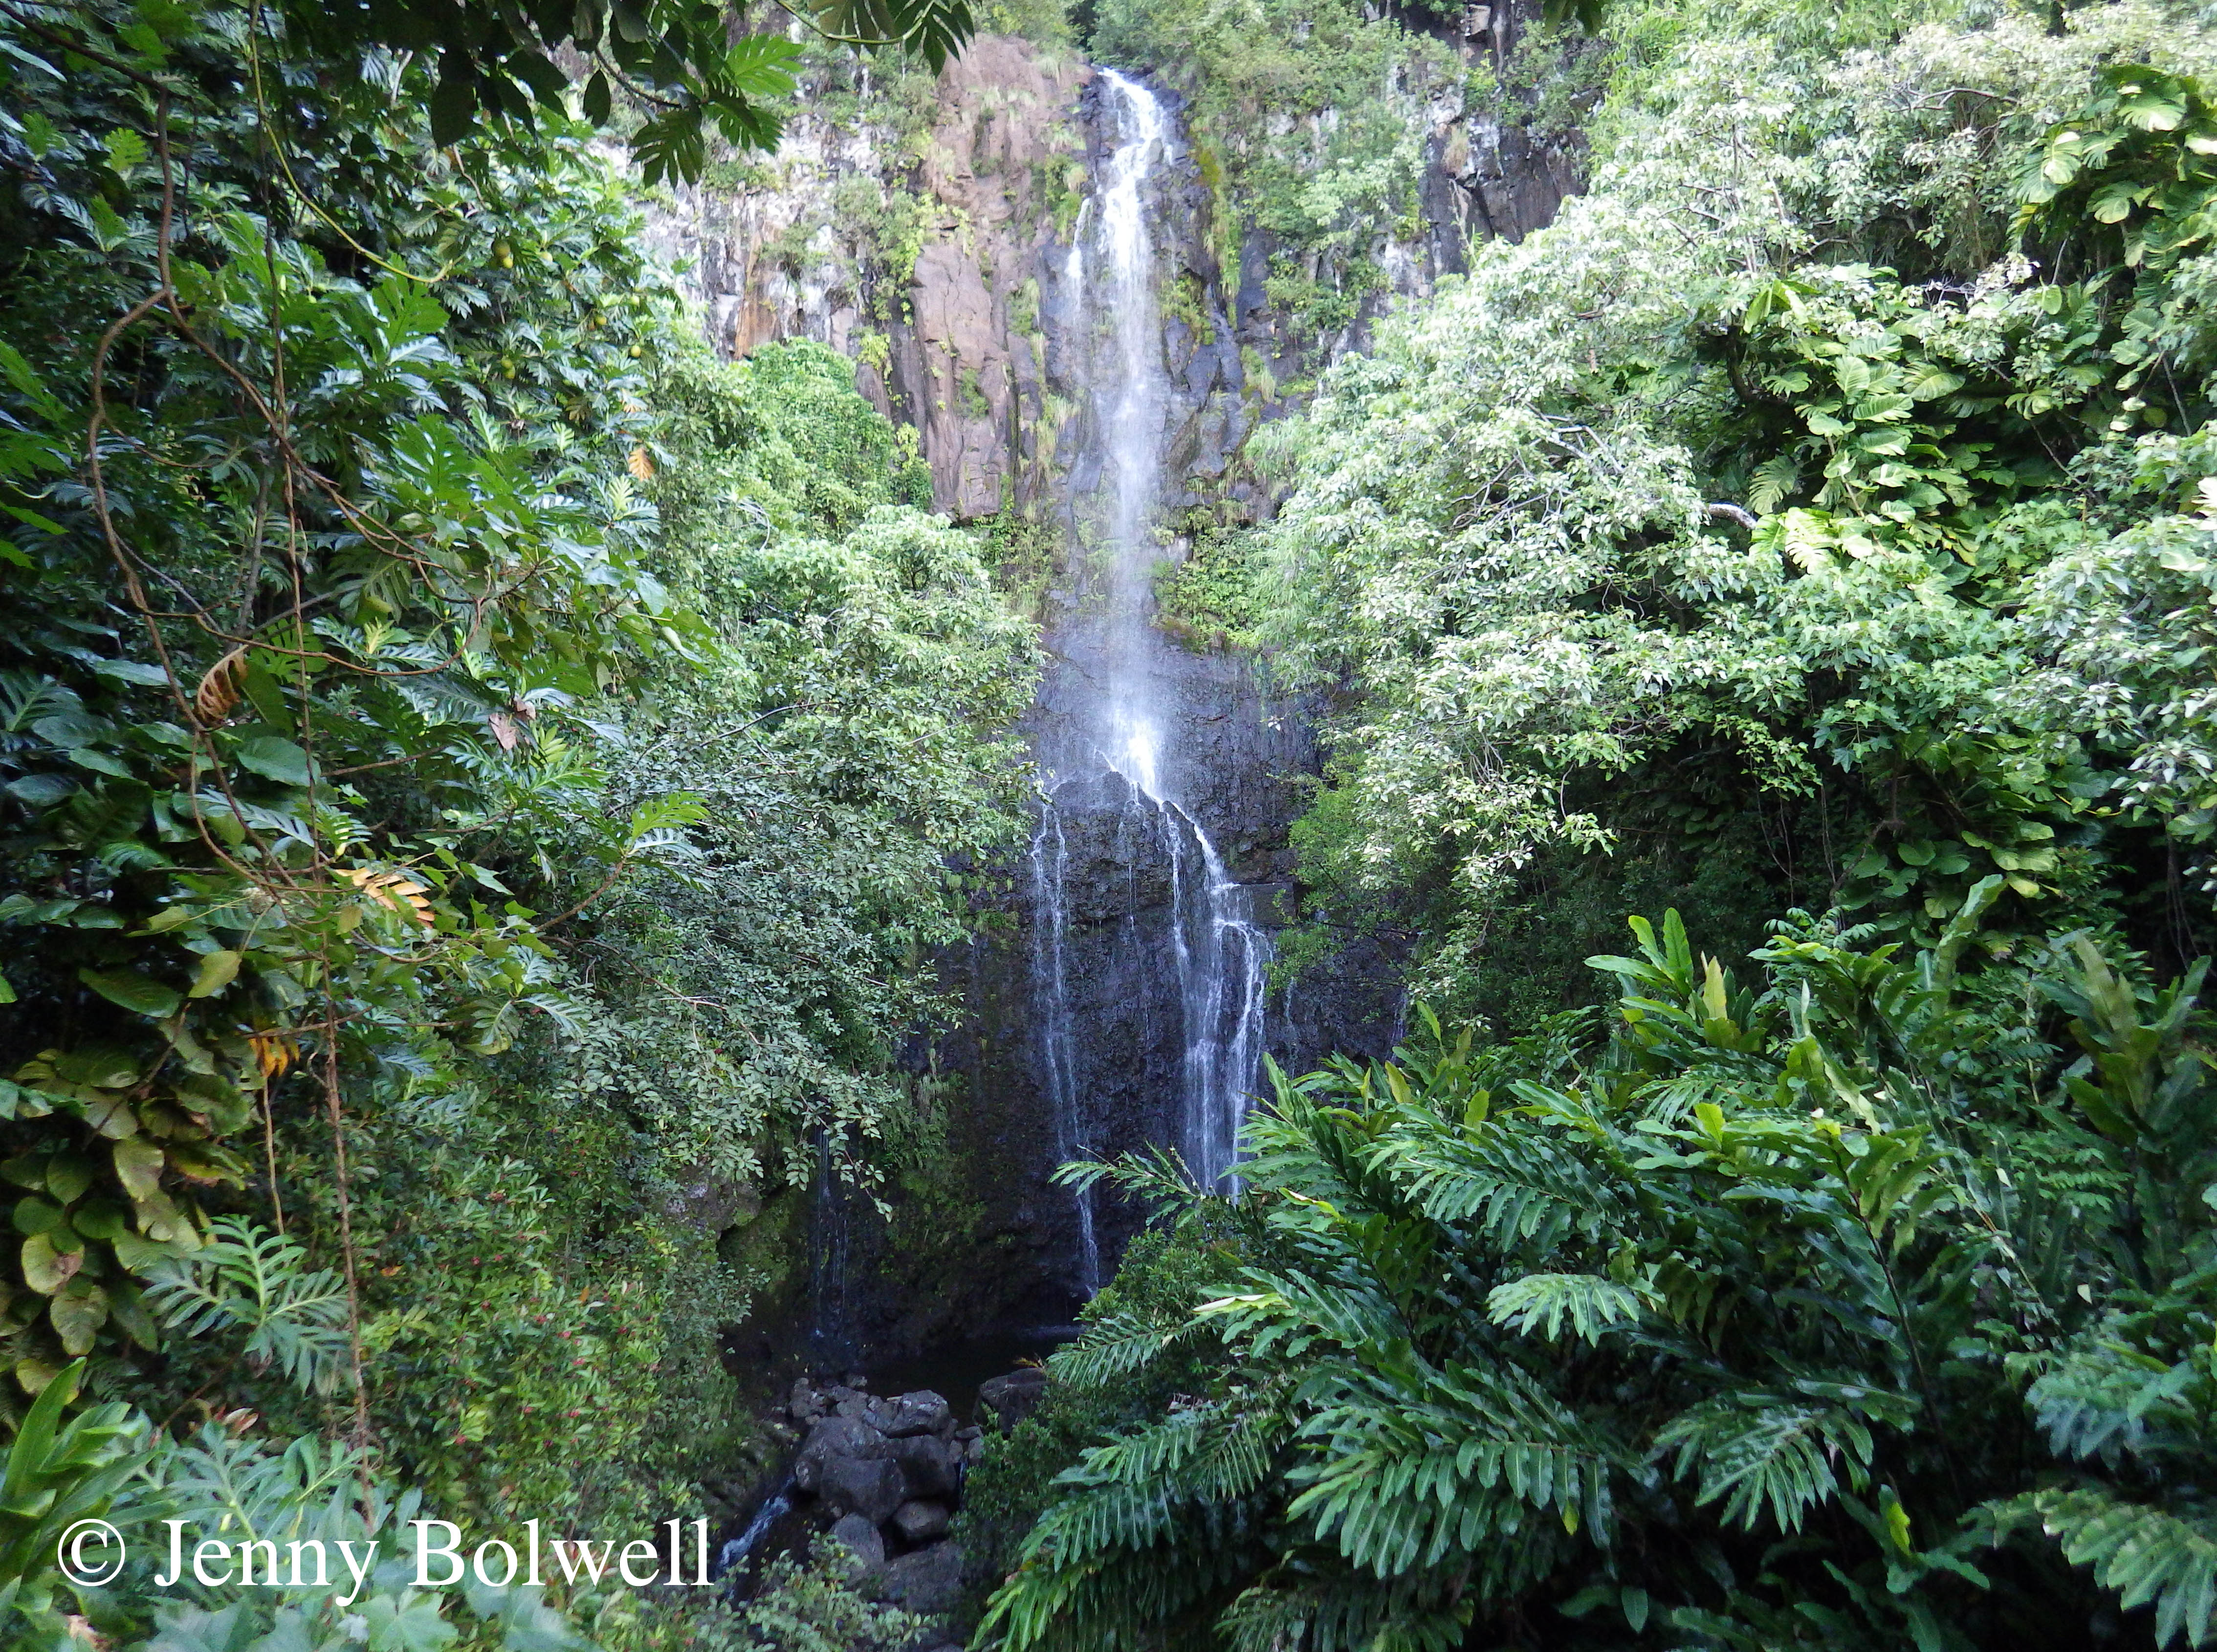 The real Hawaii - the exceptional beauty of waterfalls and forests.